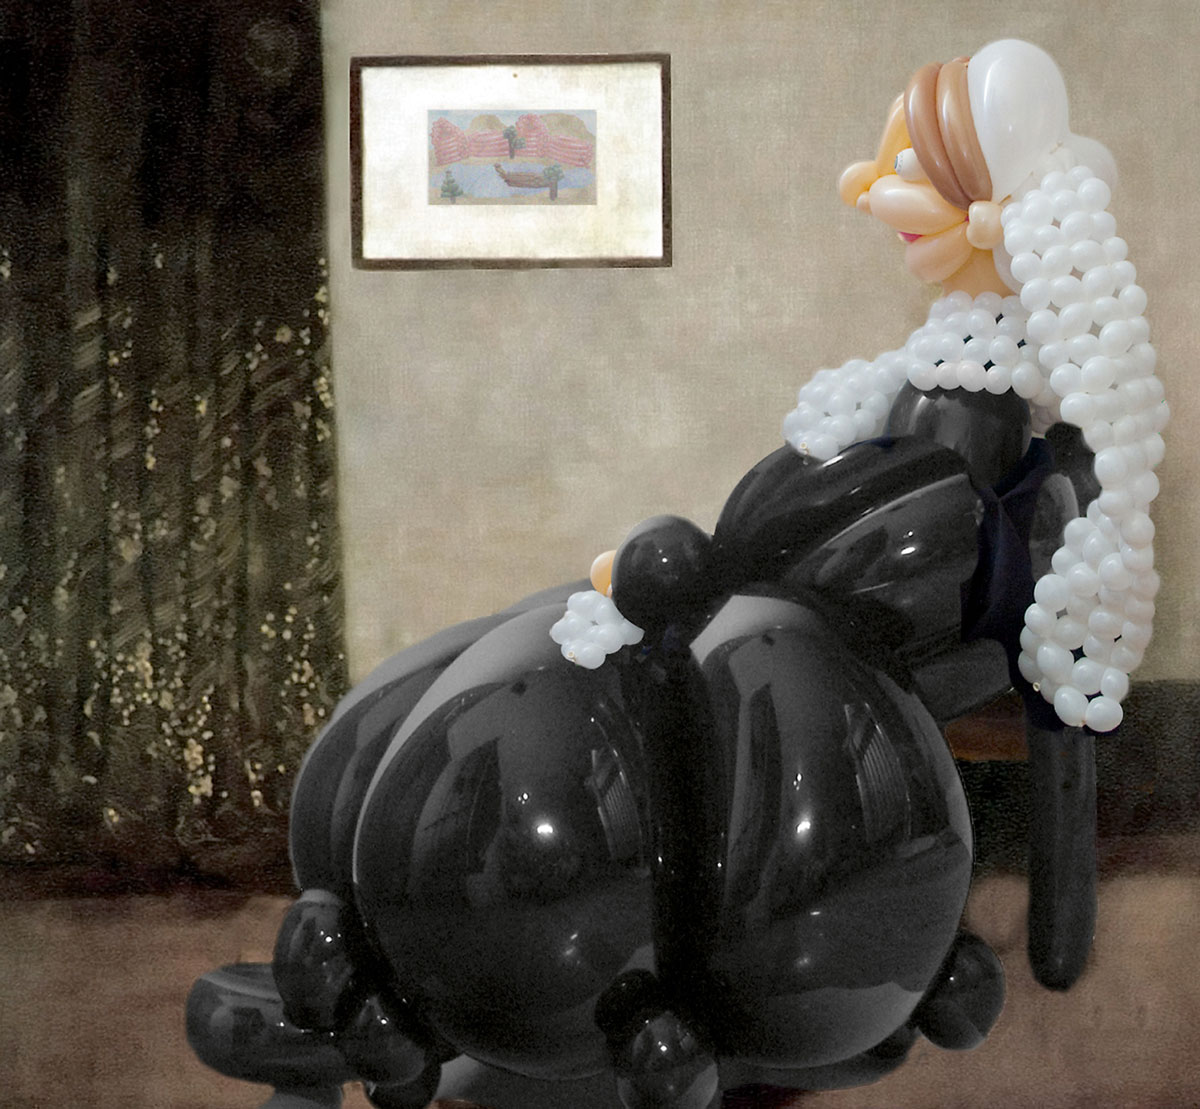 A photograph of Larry Moss’s version of James McNeill Whistler’s painting “Mother” made with balloons.